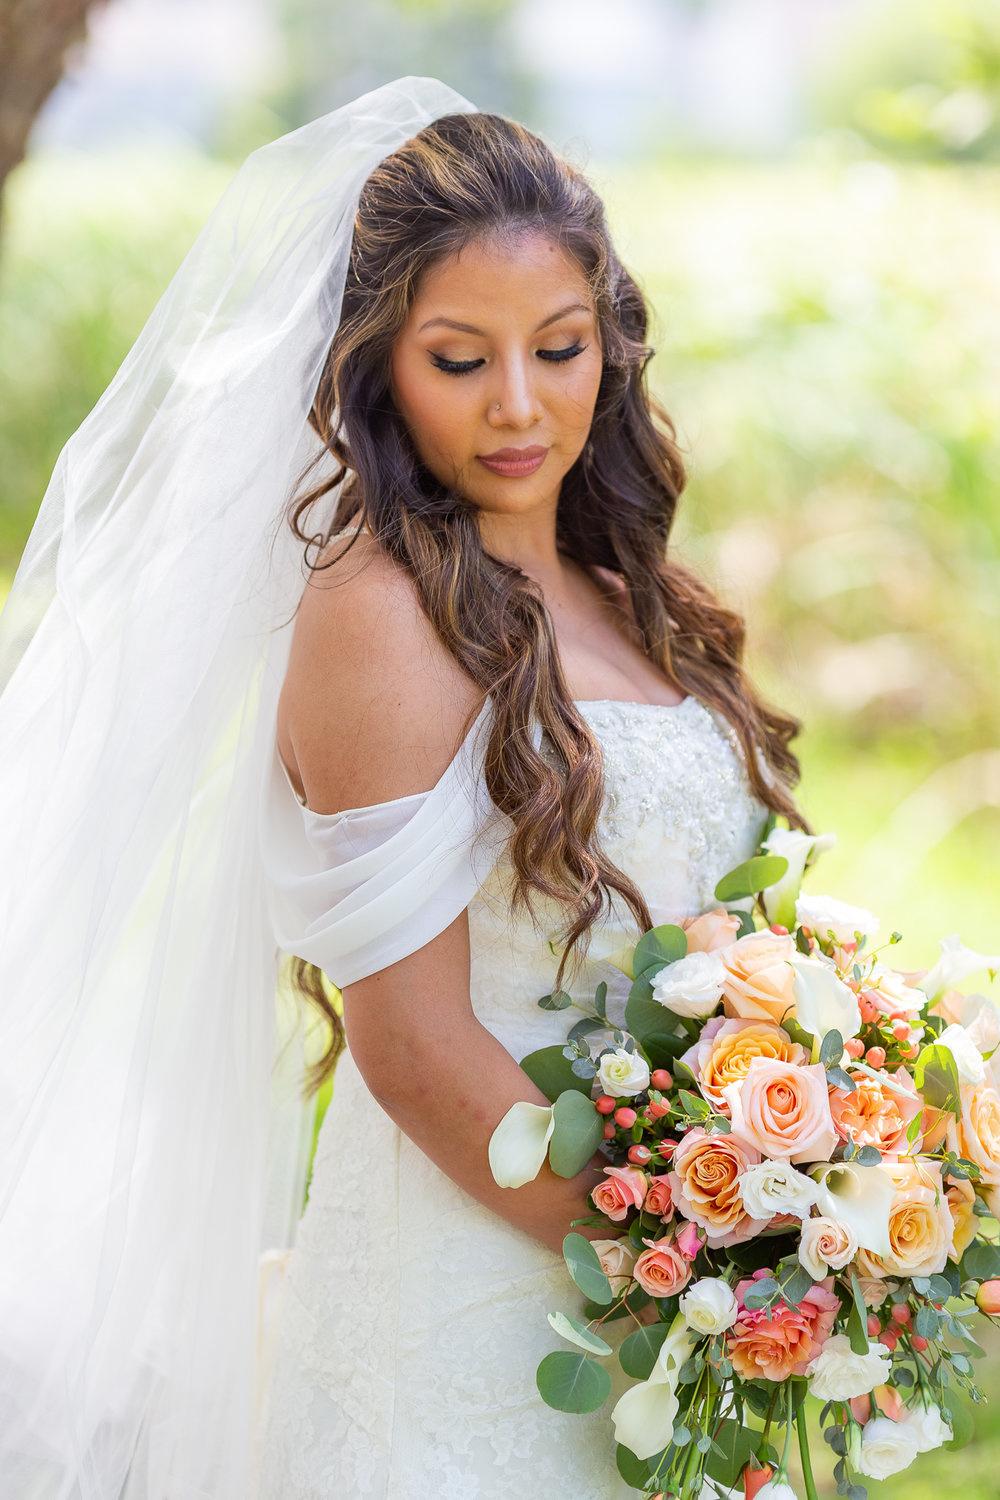 12 Wedding Hairstyles With Veil Ideas to Inspire You  All Things Hair US